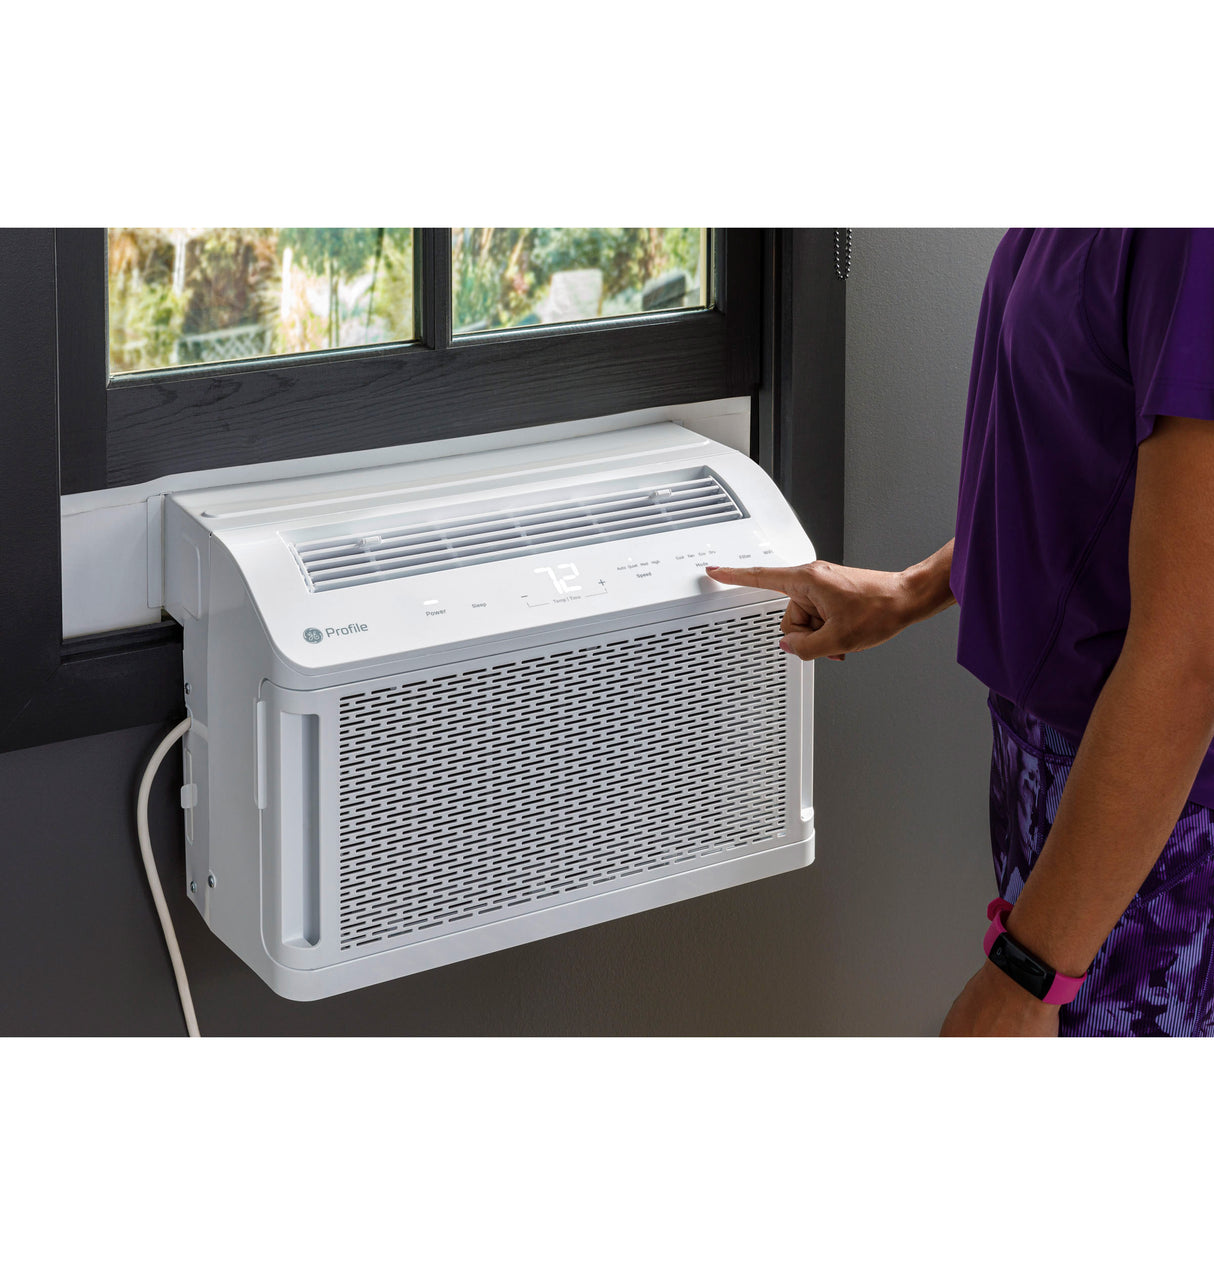 GE Profile ClearView(TM) 8,300 BTU Smart Ultra Quiet Window Air Conditioner for Medium Rooms up to 350 sq. ft. - (AHTT08BC)